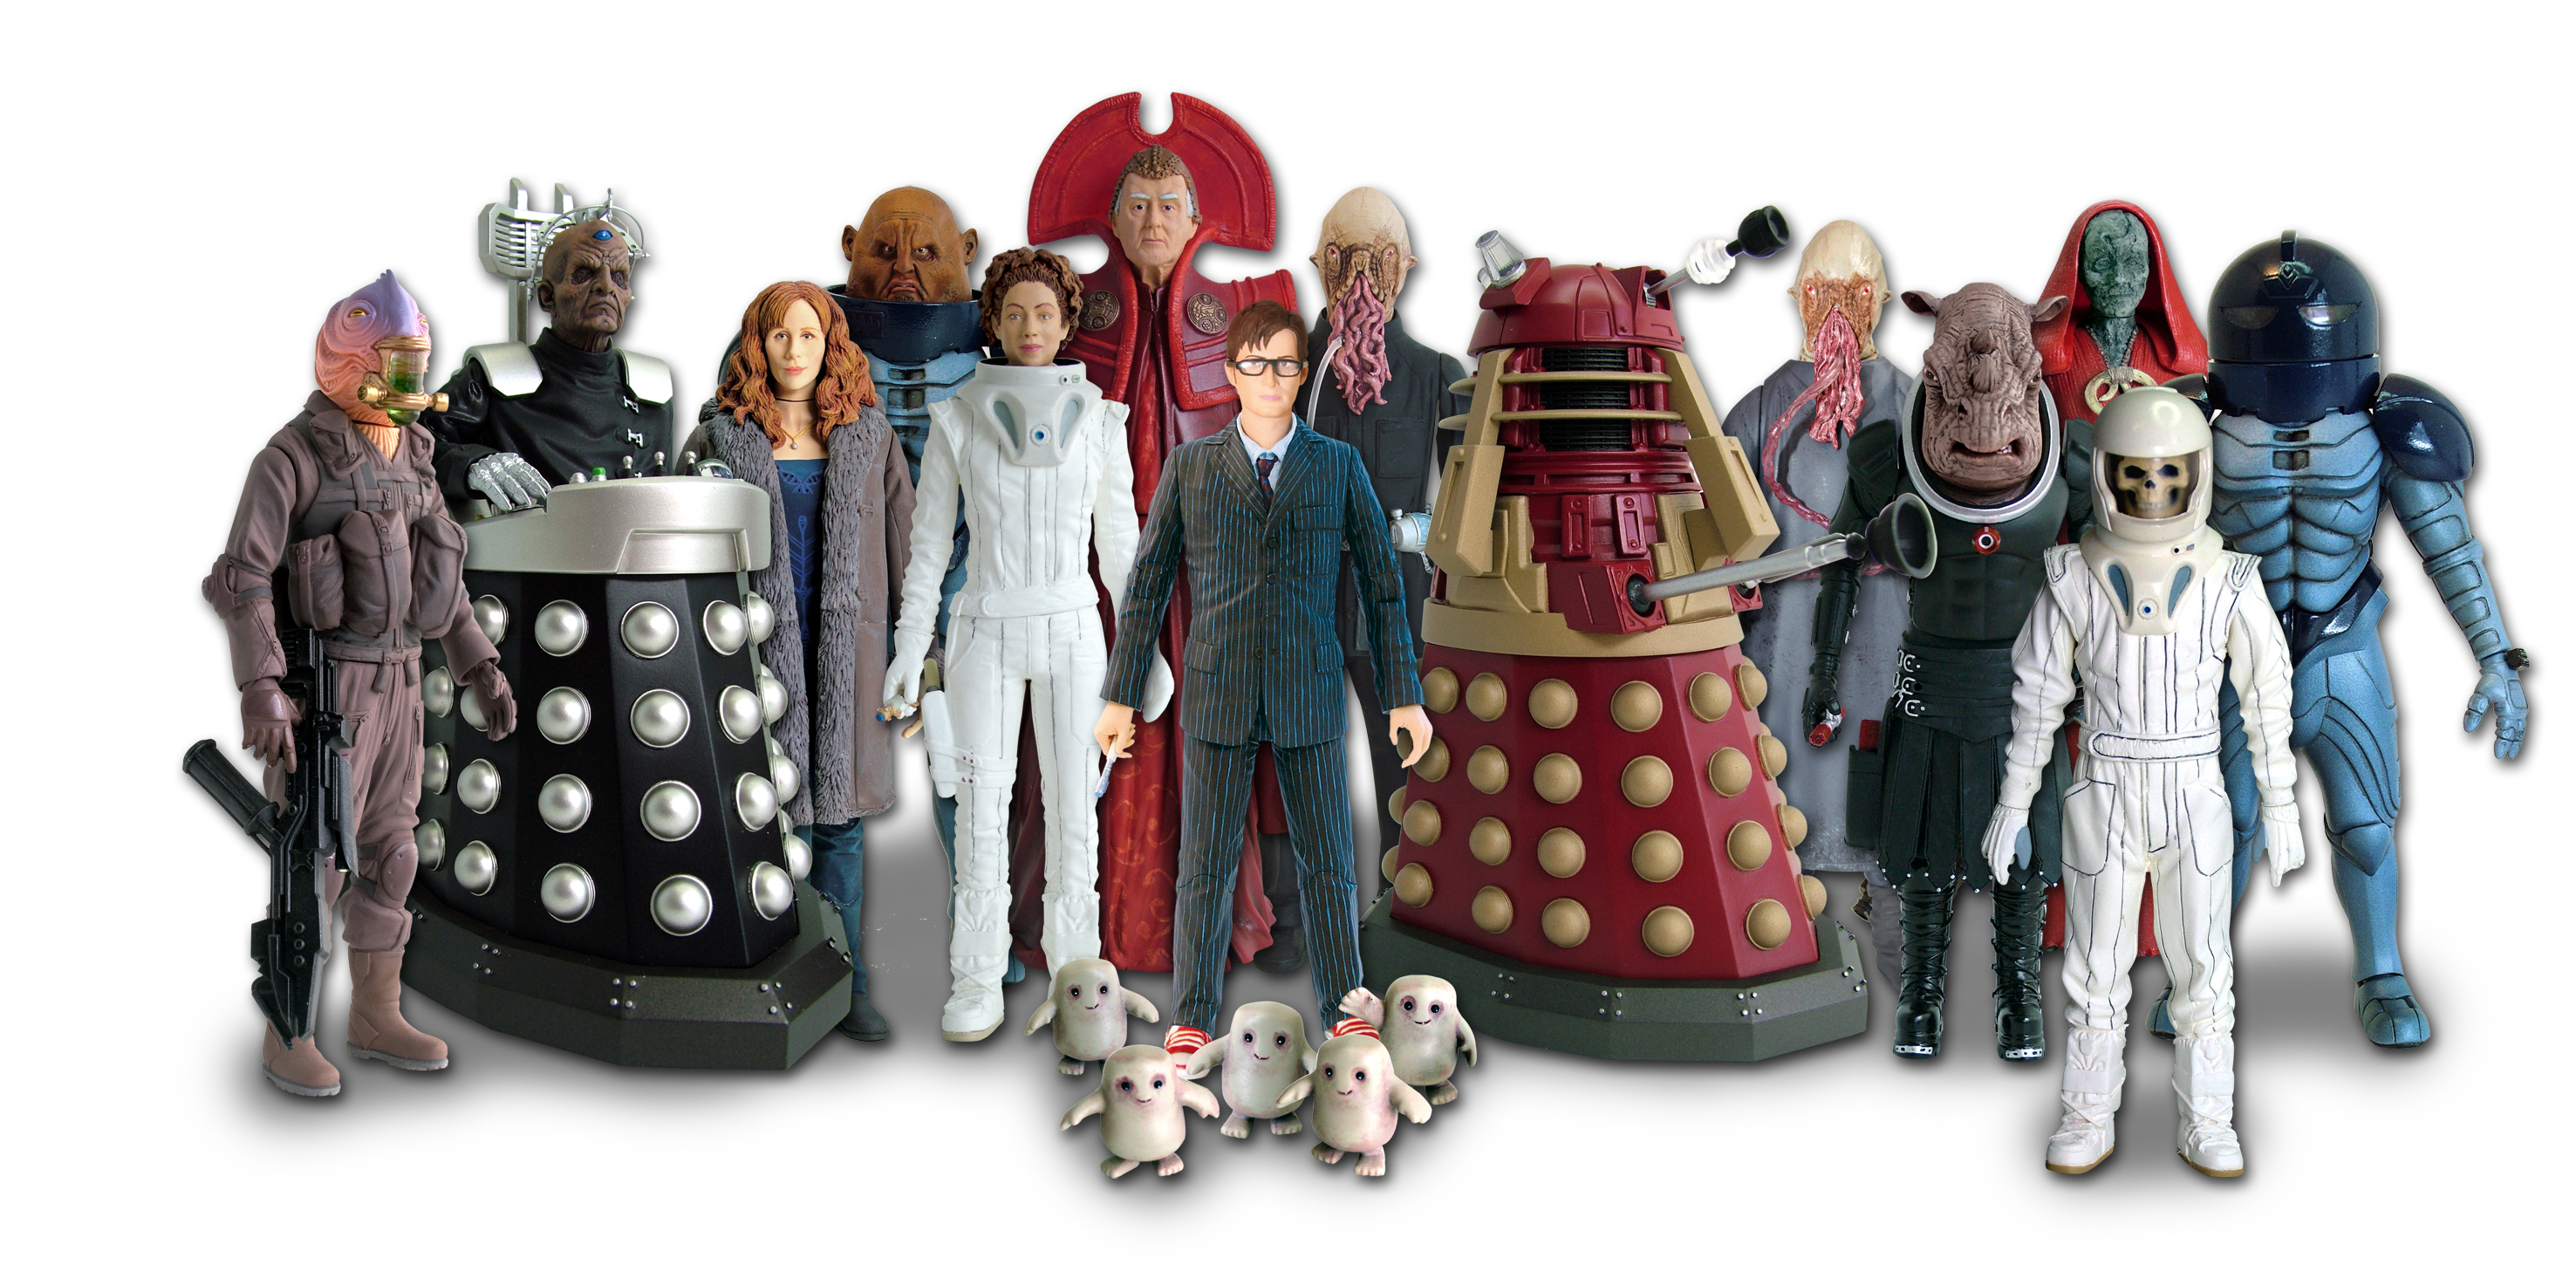 Timelord Figures Series 4